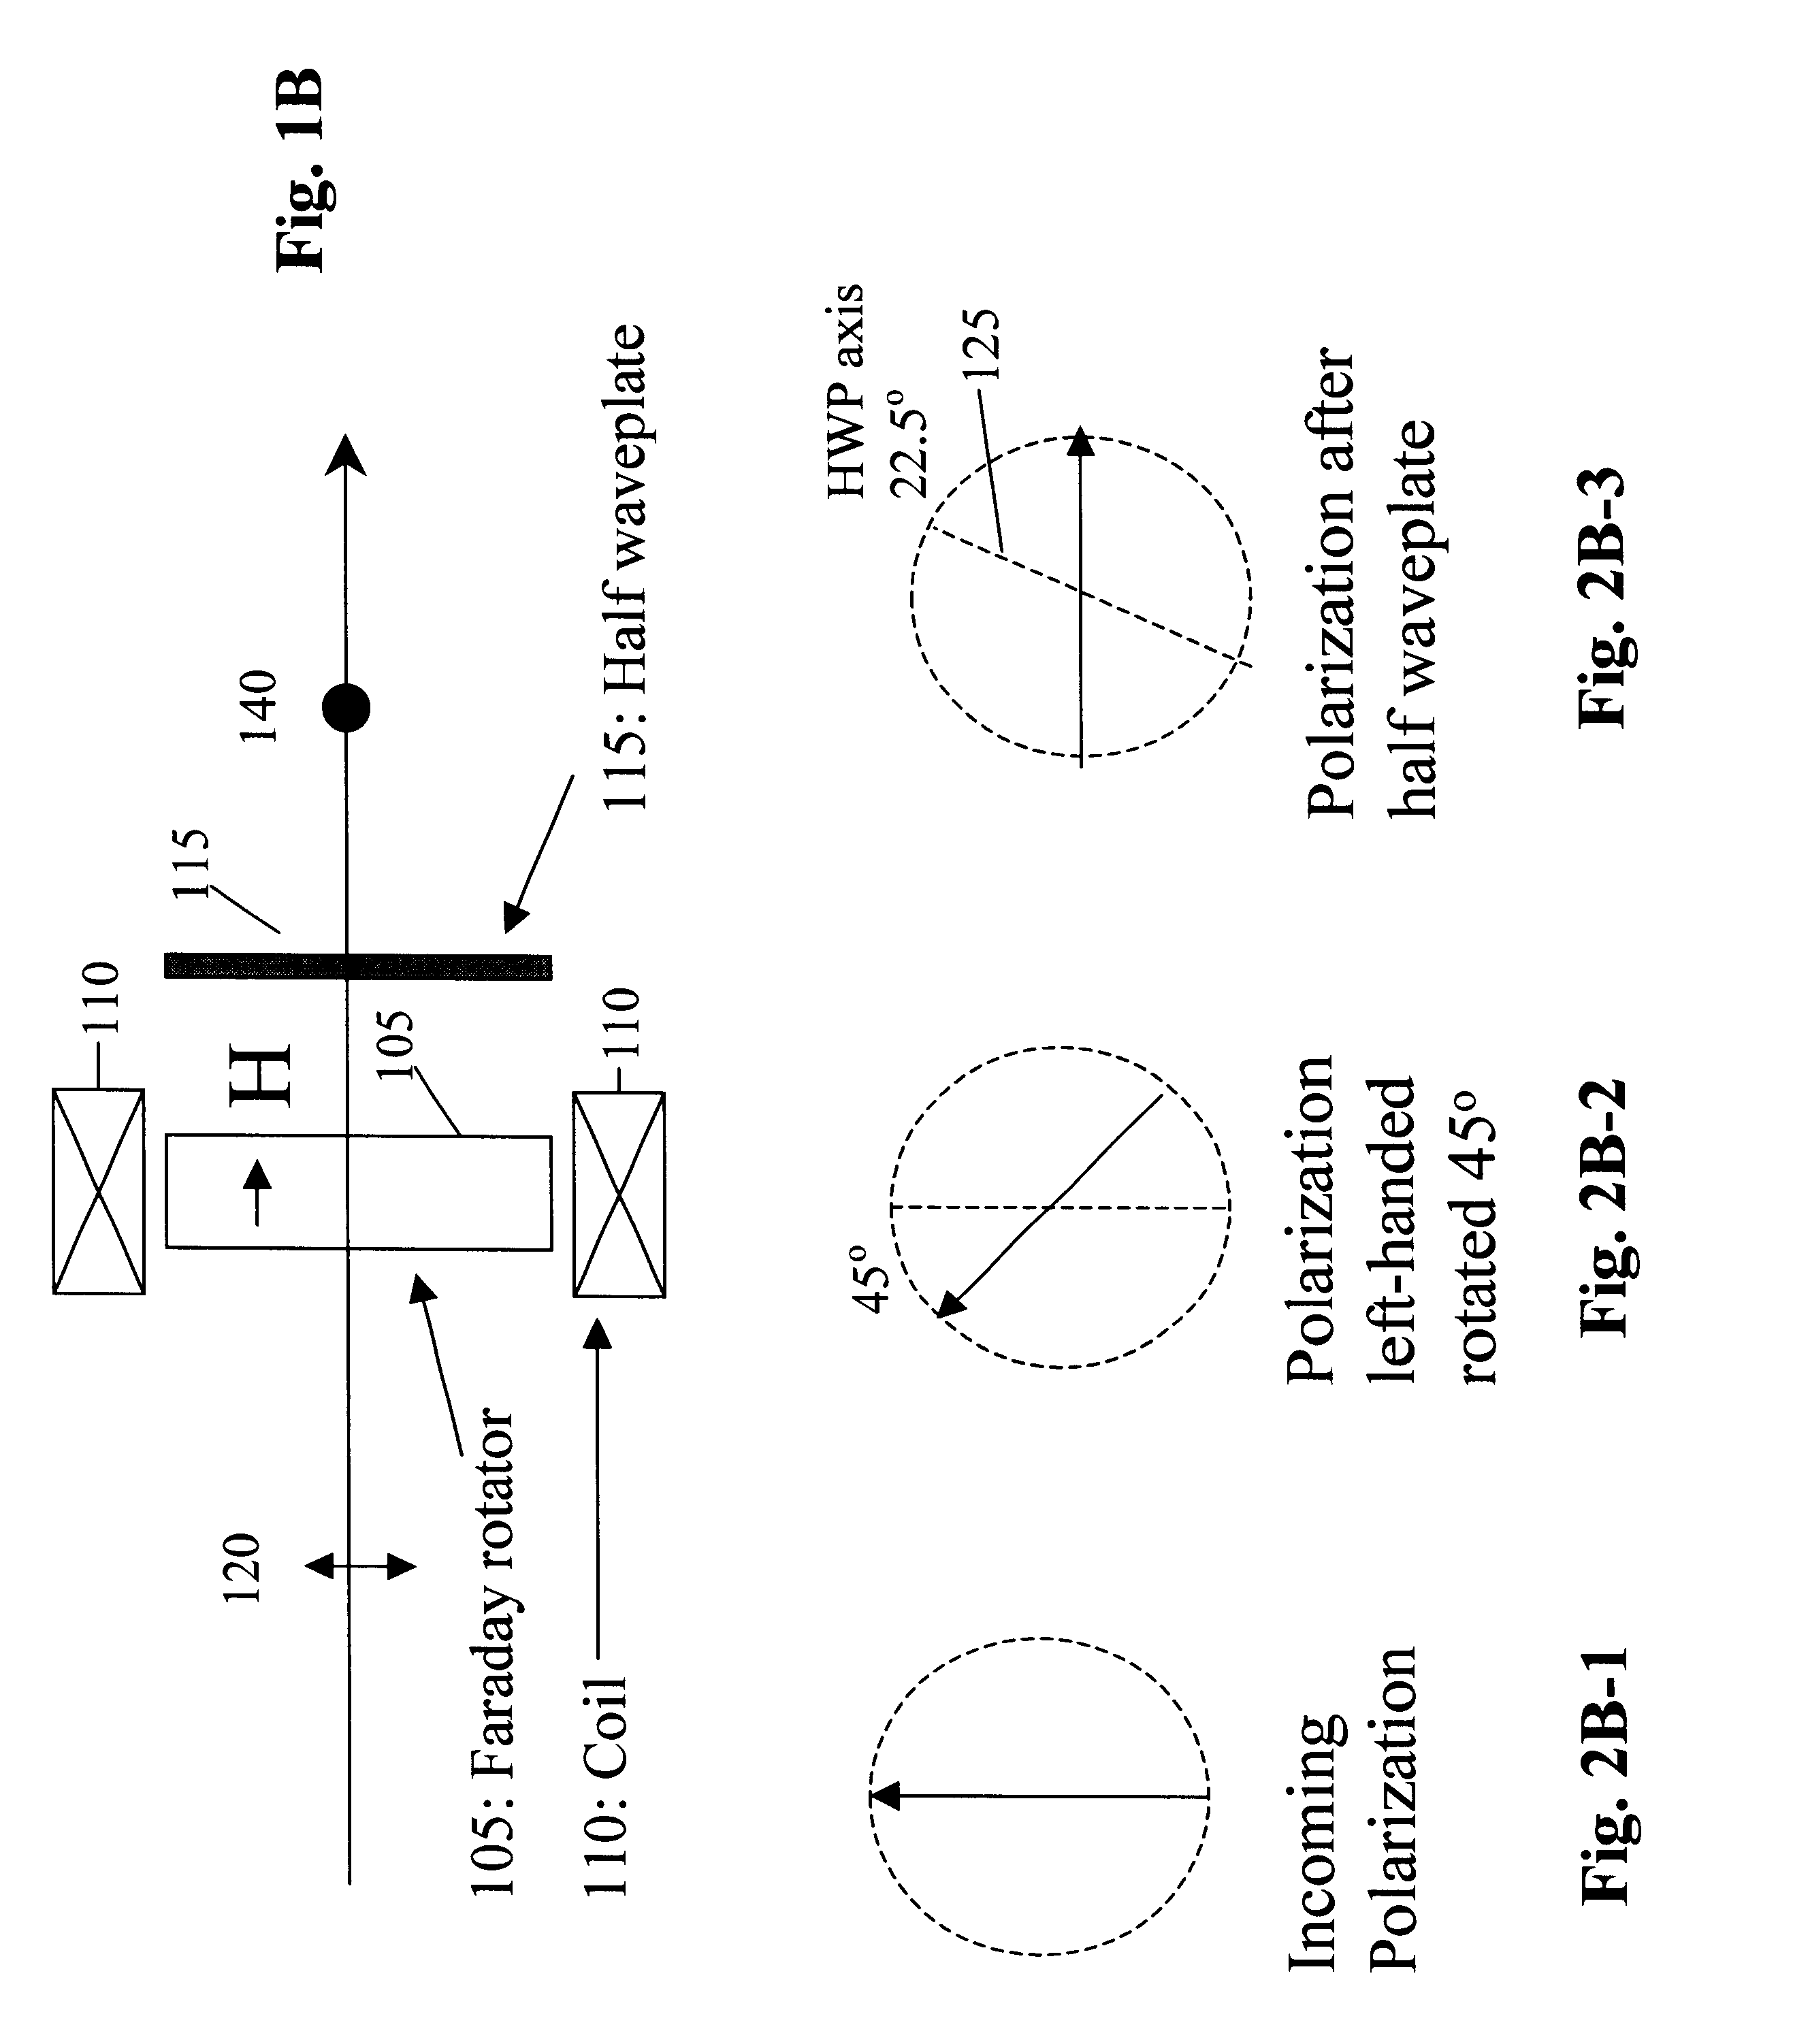 High switching speed digital faraday rotator device and optical switches containing the same